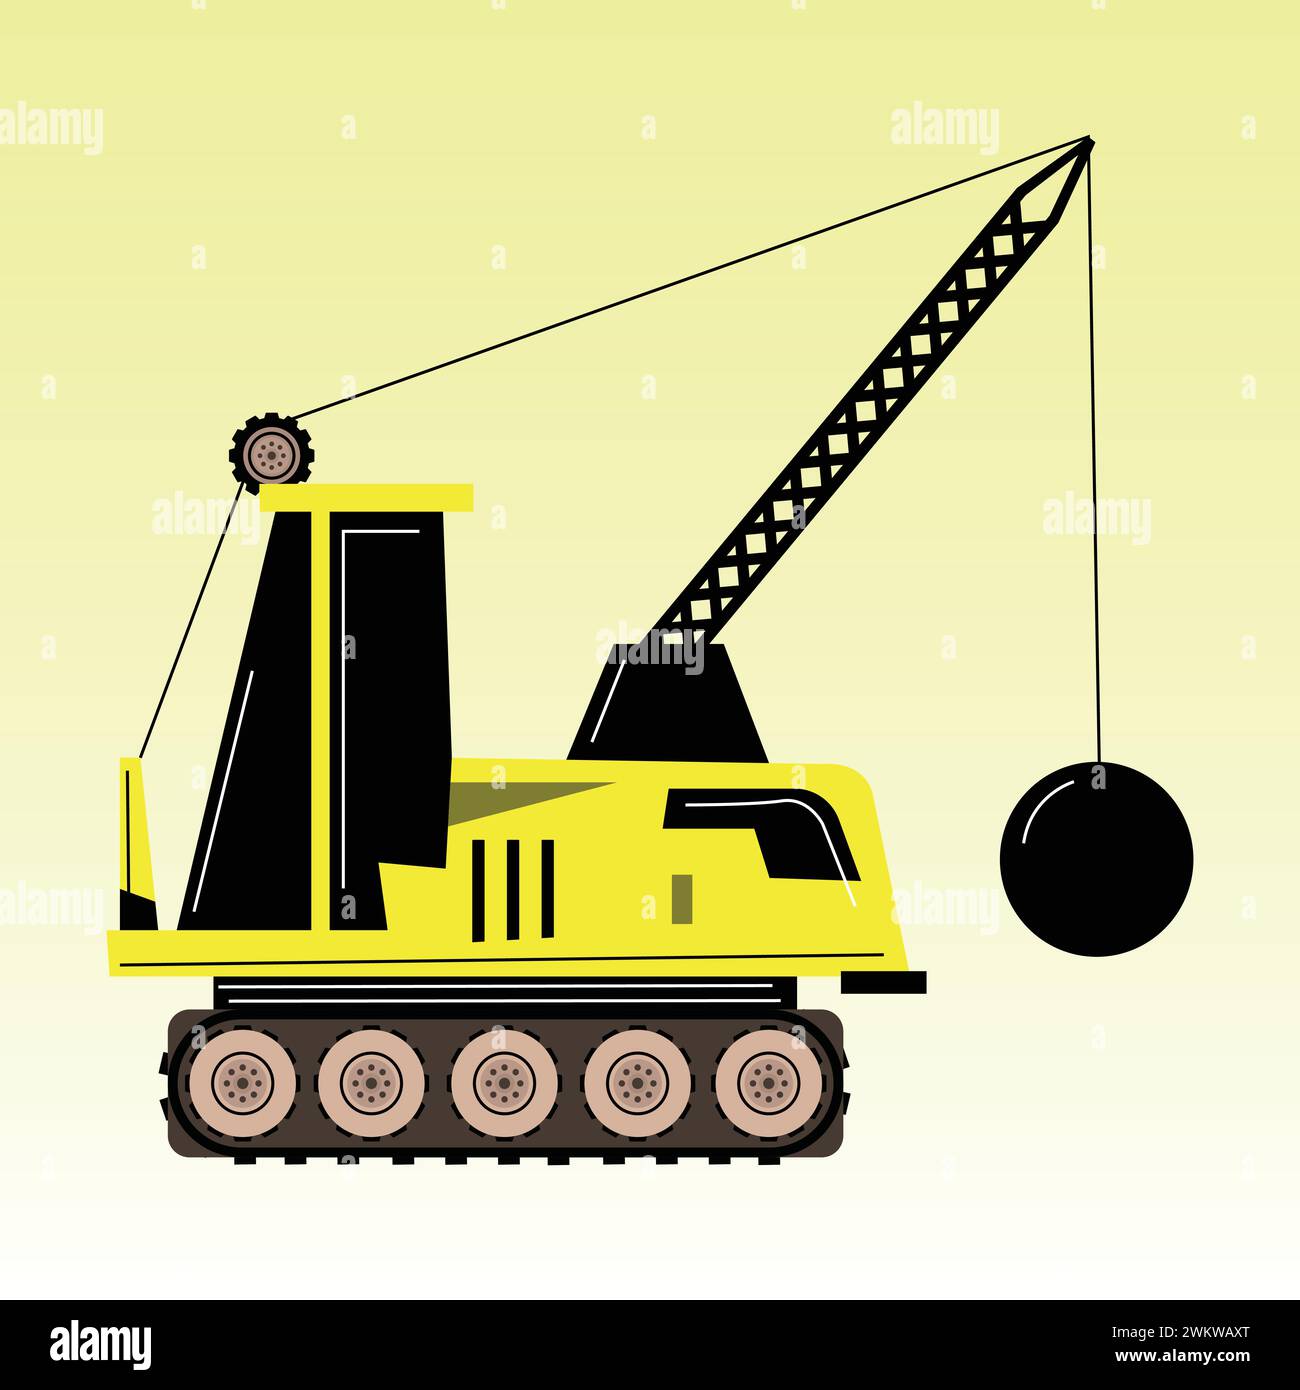 yellow black Heavy wall breaking tractor, demolition machine in flat. industrial machinery and equipment. Stock Vector